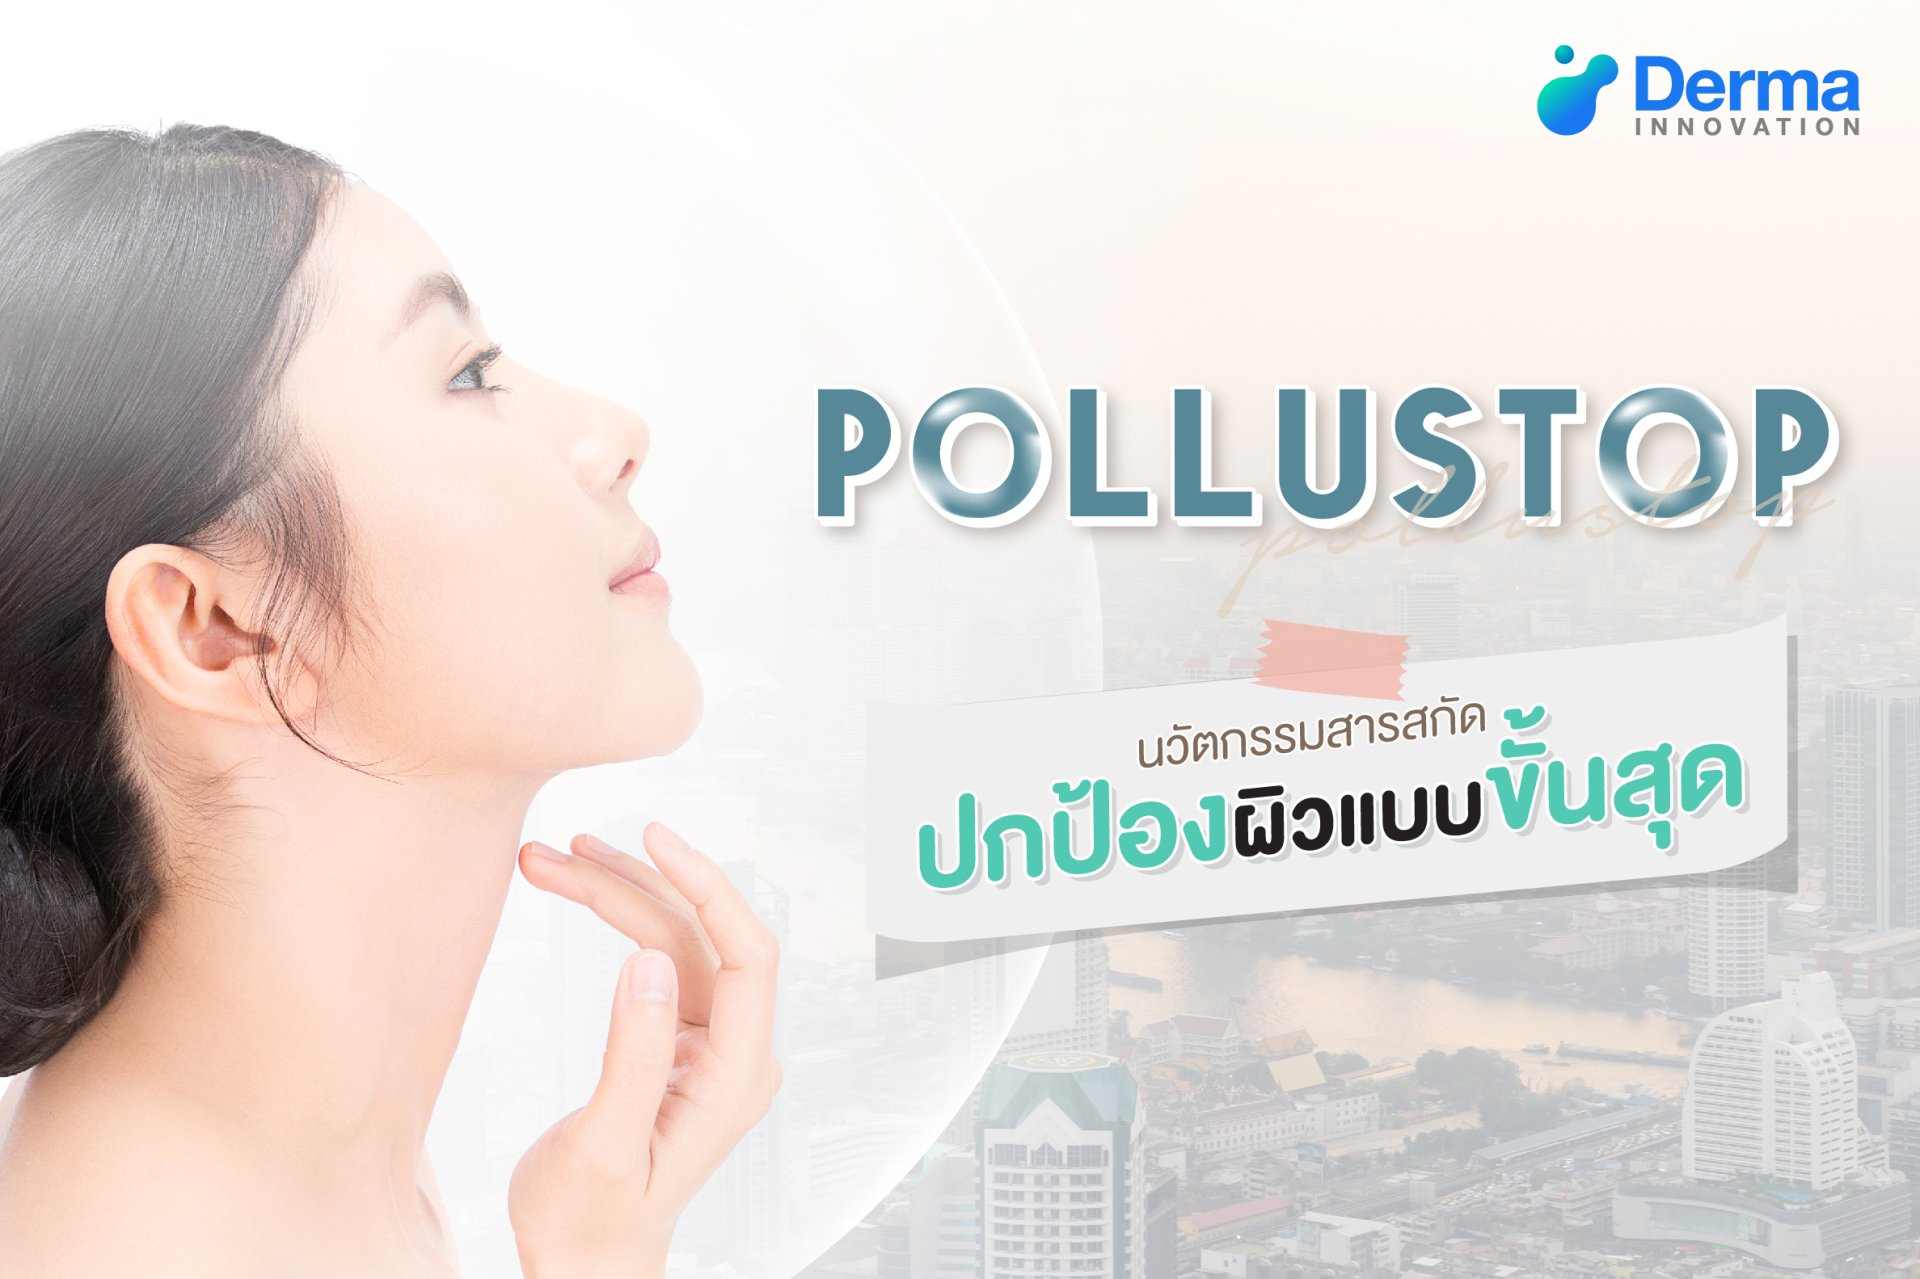 POLLUSTOP's innovative ultimate skin protection extract